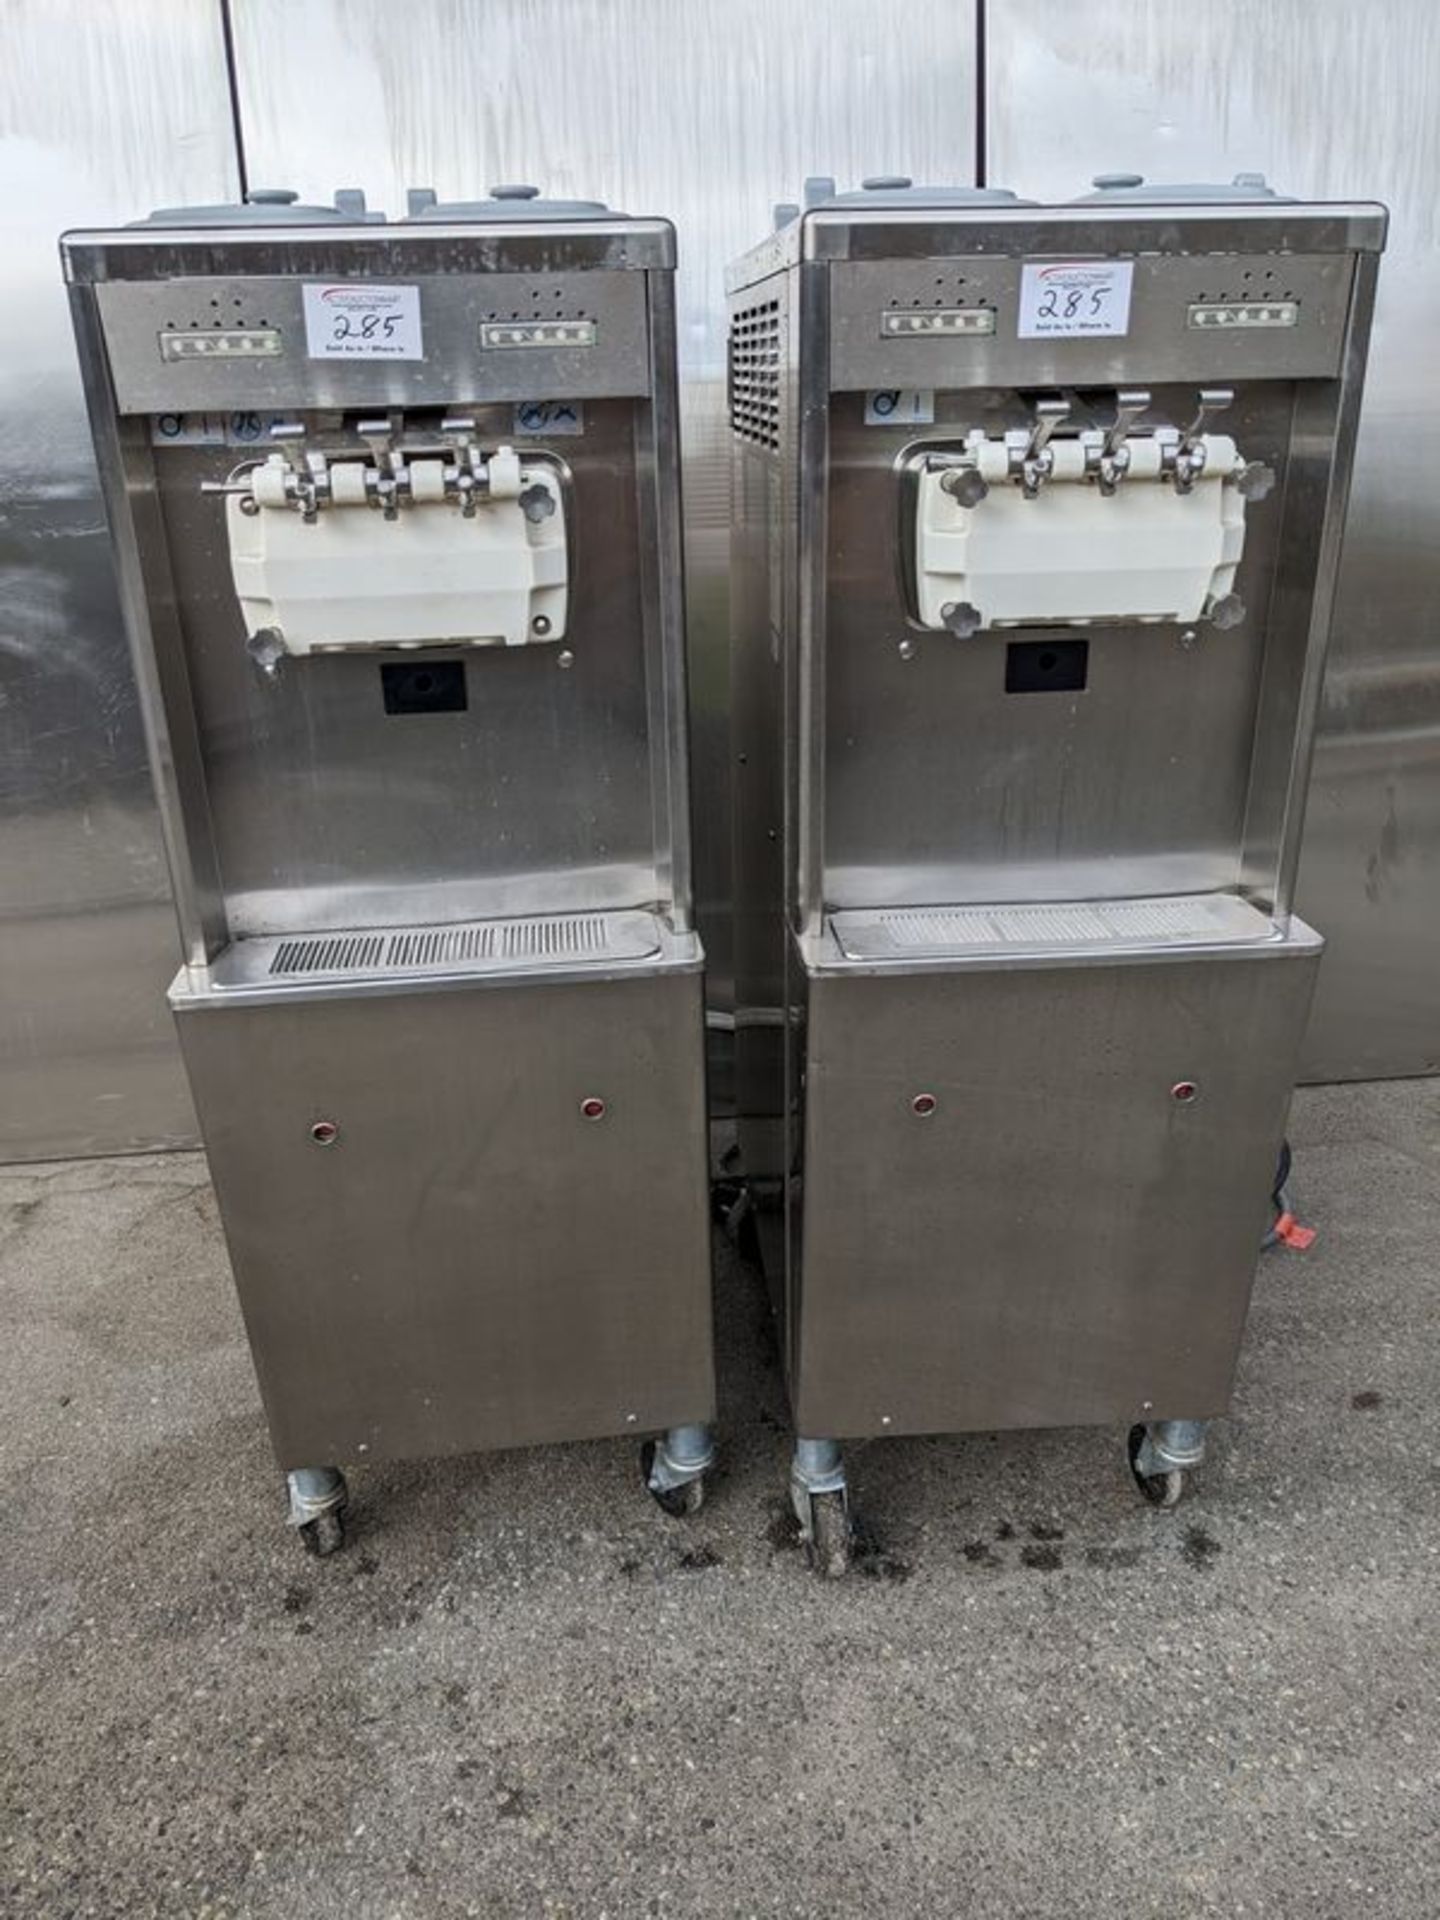 2 Taylor Model 791-33 Twin Head Soft Serve Machine - Note Operating Condition Unknown